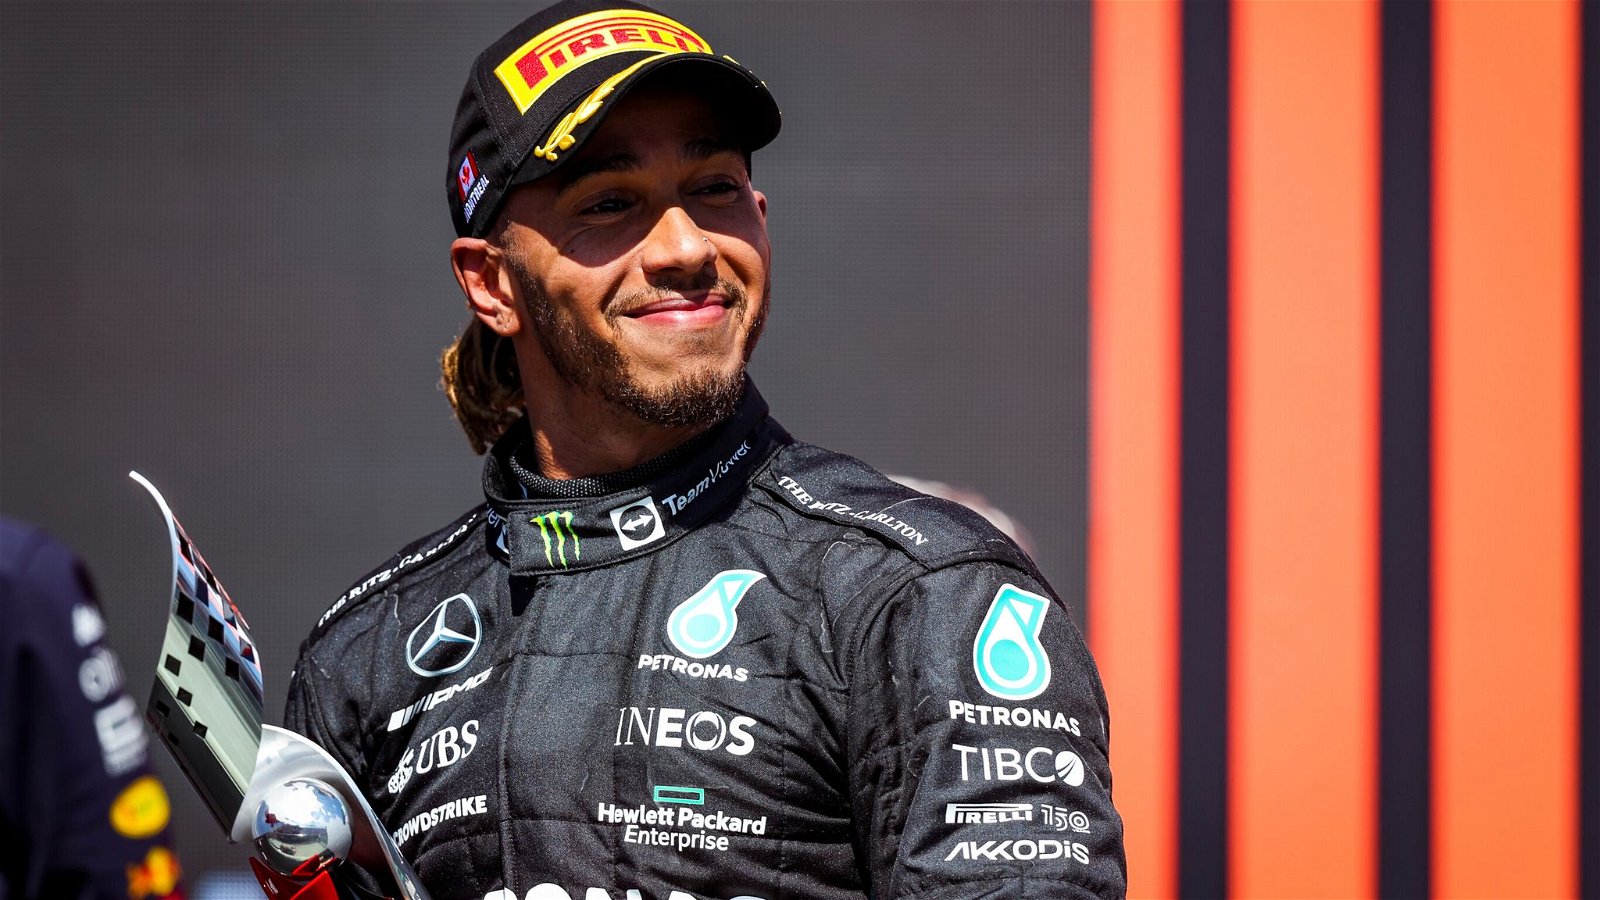 “I’ll be damned if…”: When Lewis Hamilton Revealed What He Wanted To Achieve Other Than The Titles He Wins In F1